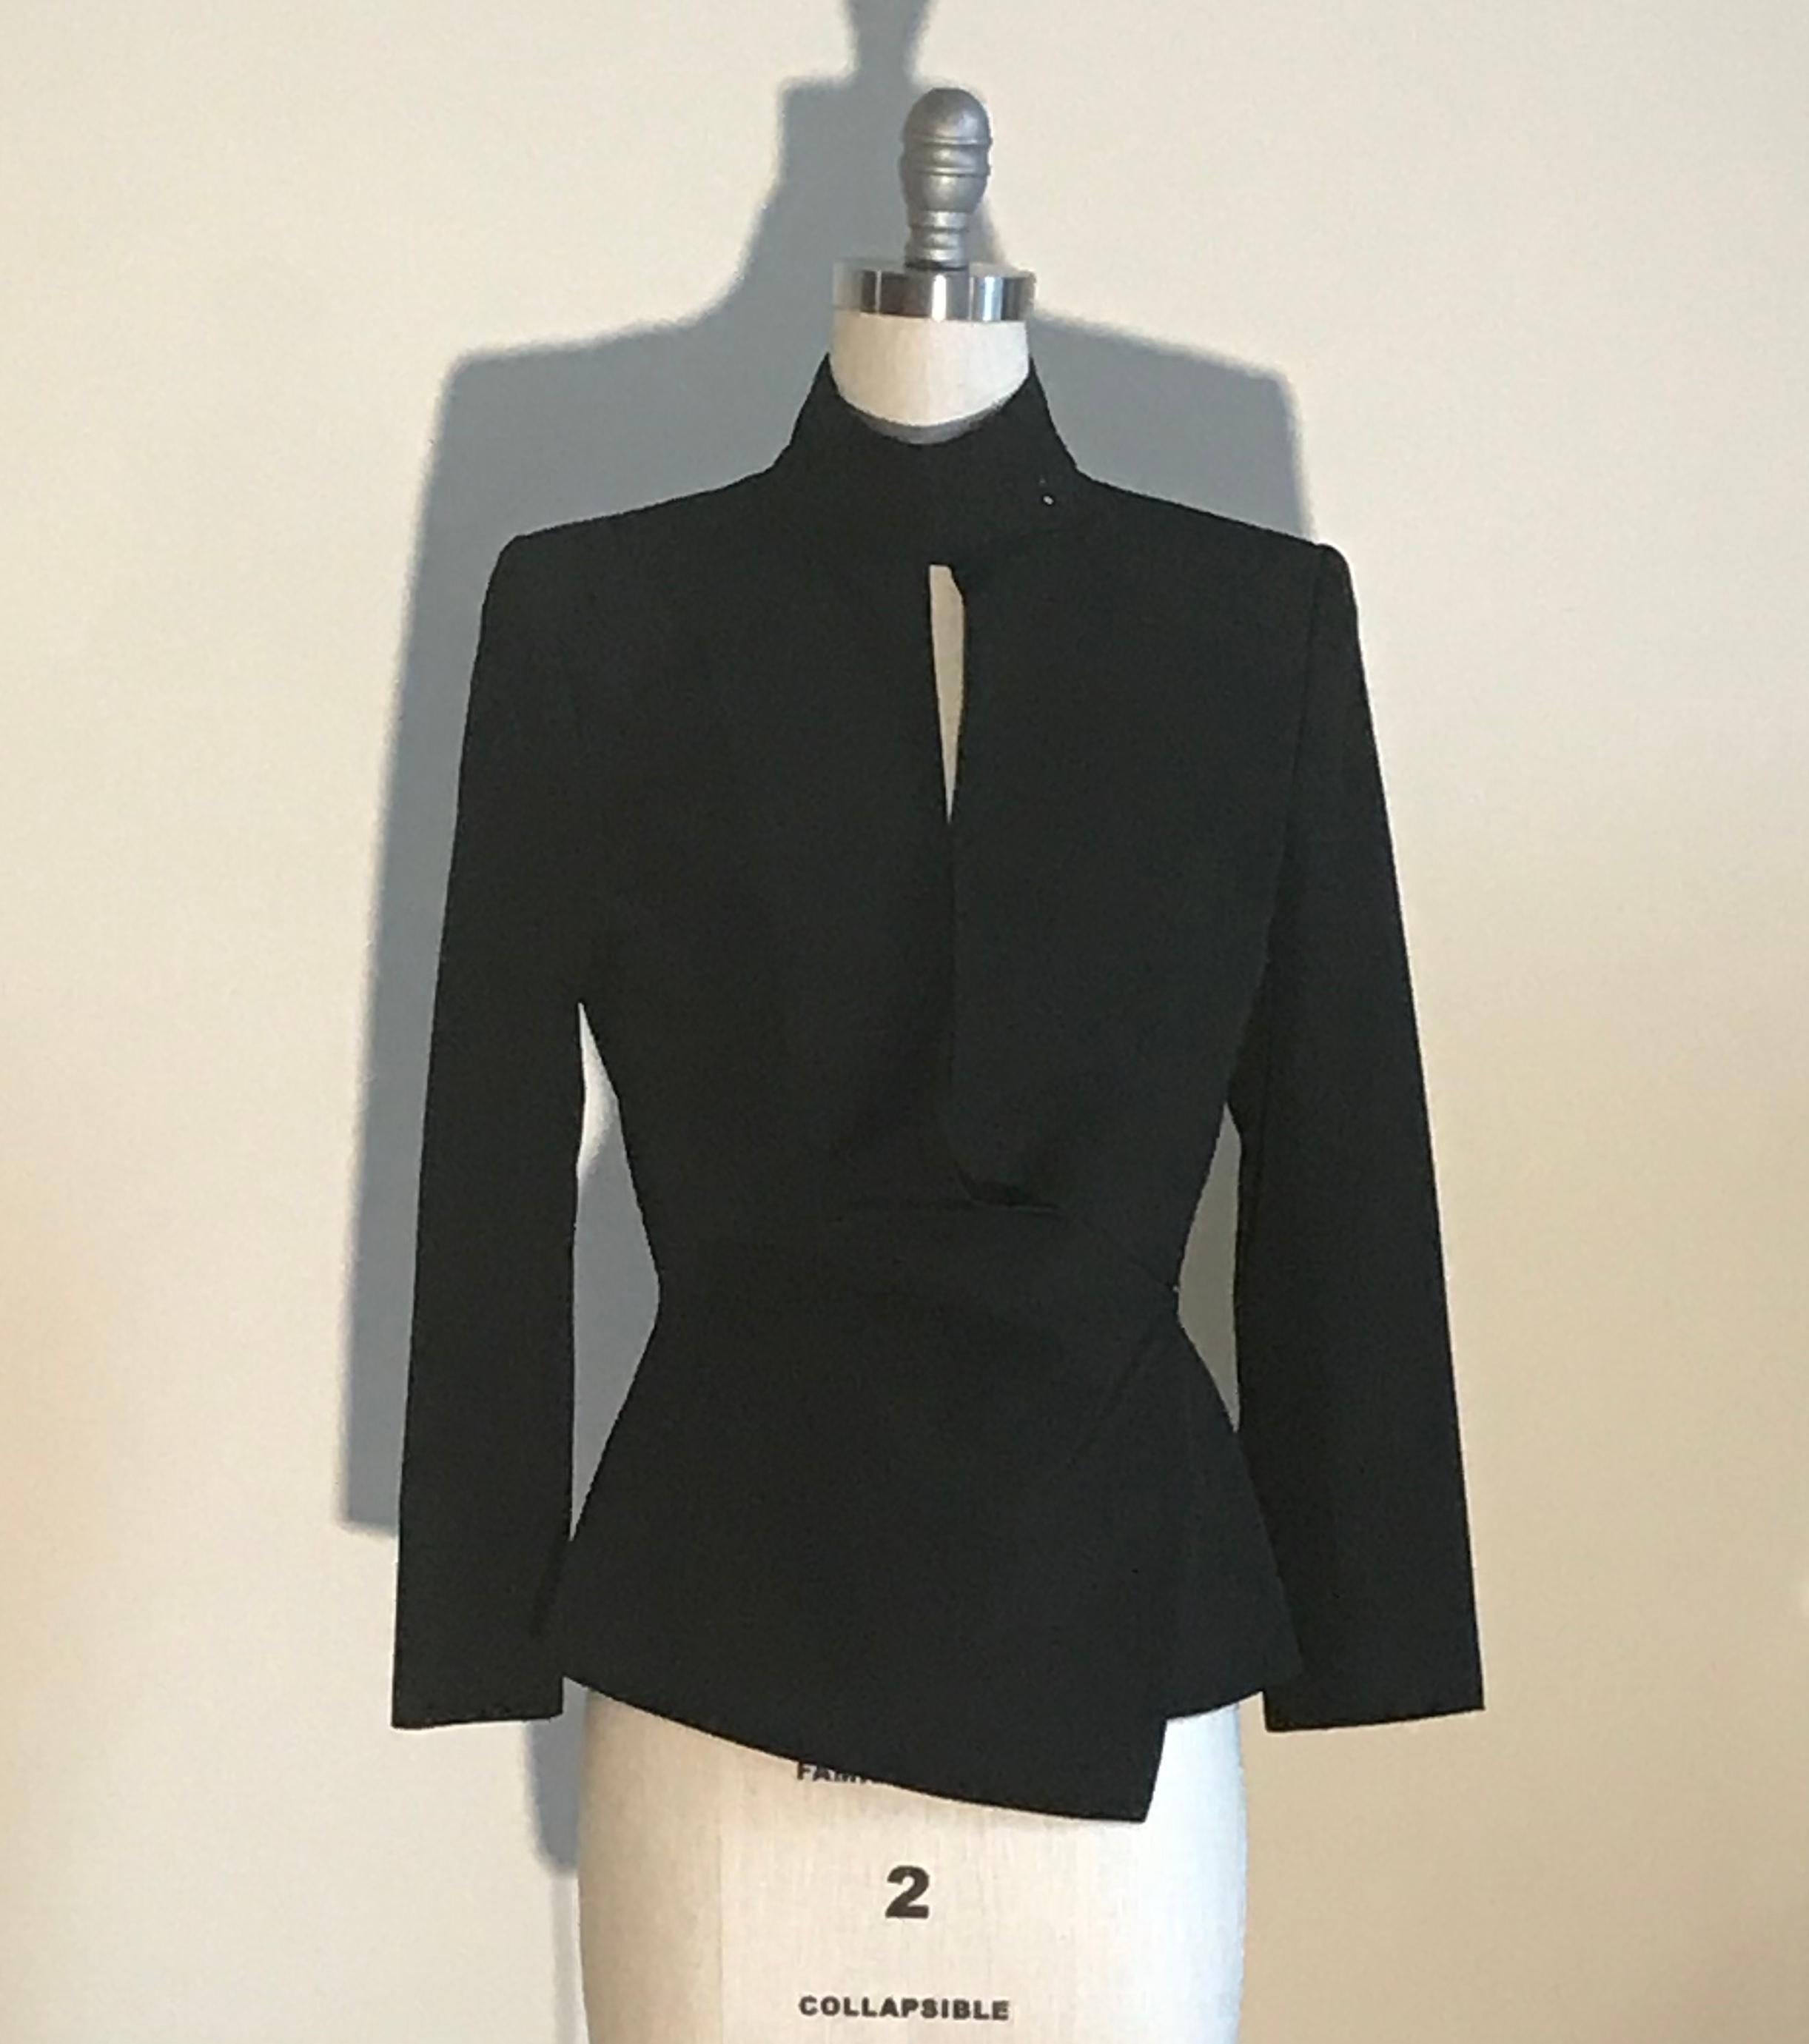 Yves Saint Laurent Rive Gauche black jacket with sexy draped detailing. Fastens at front with hidden button and gold hook and eye and with four gold hook and eyes at collar, creating a cut out detail. Light padding at shoulders. Most likely from the